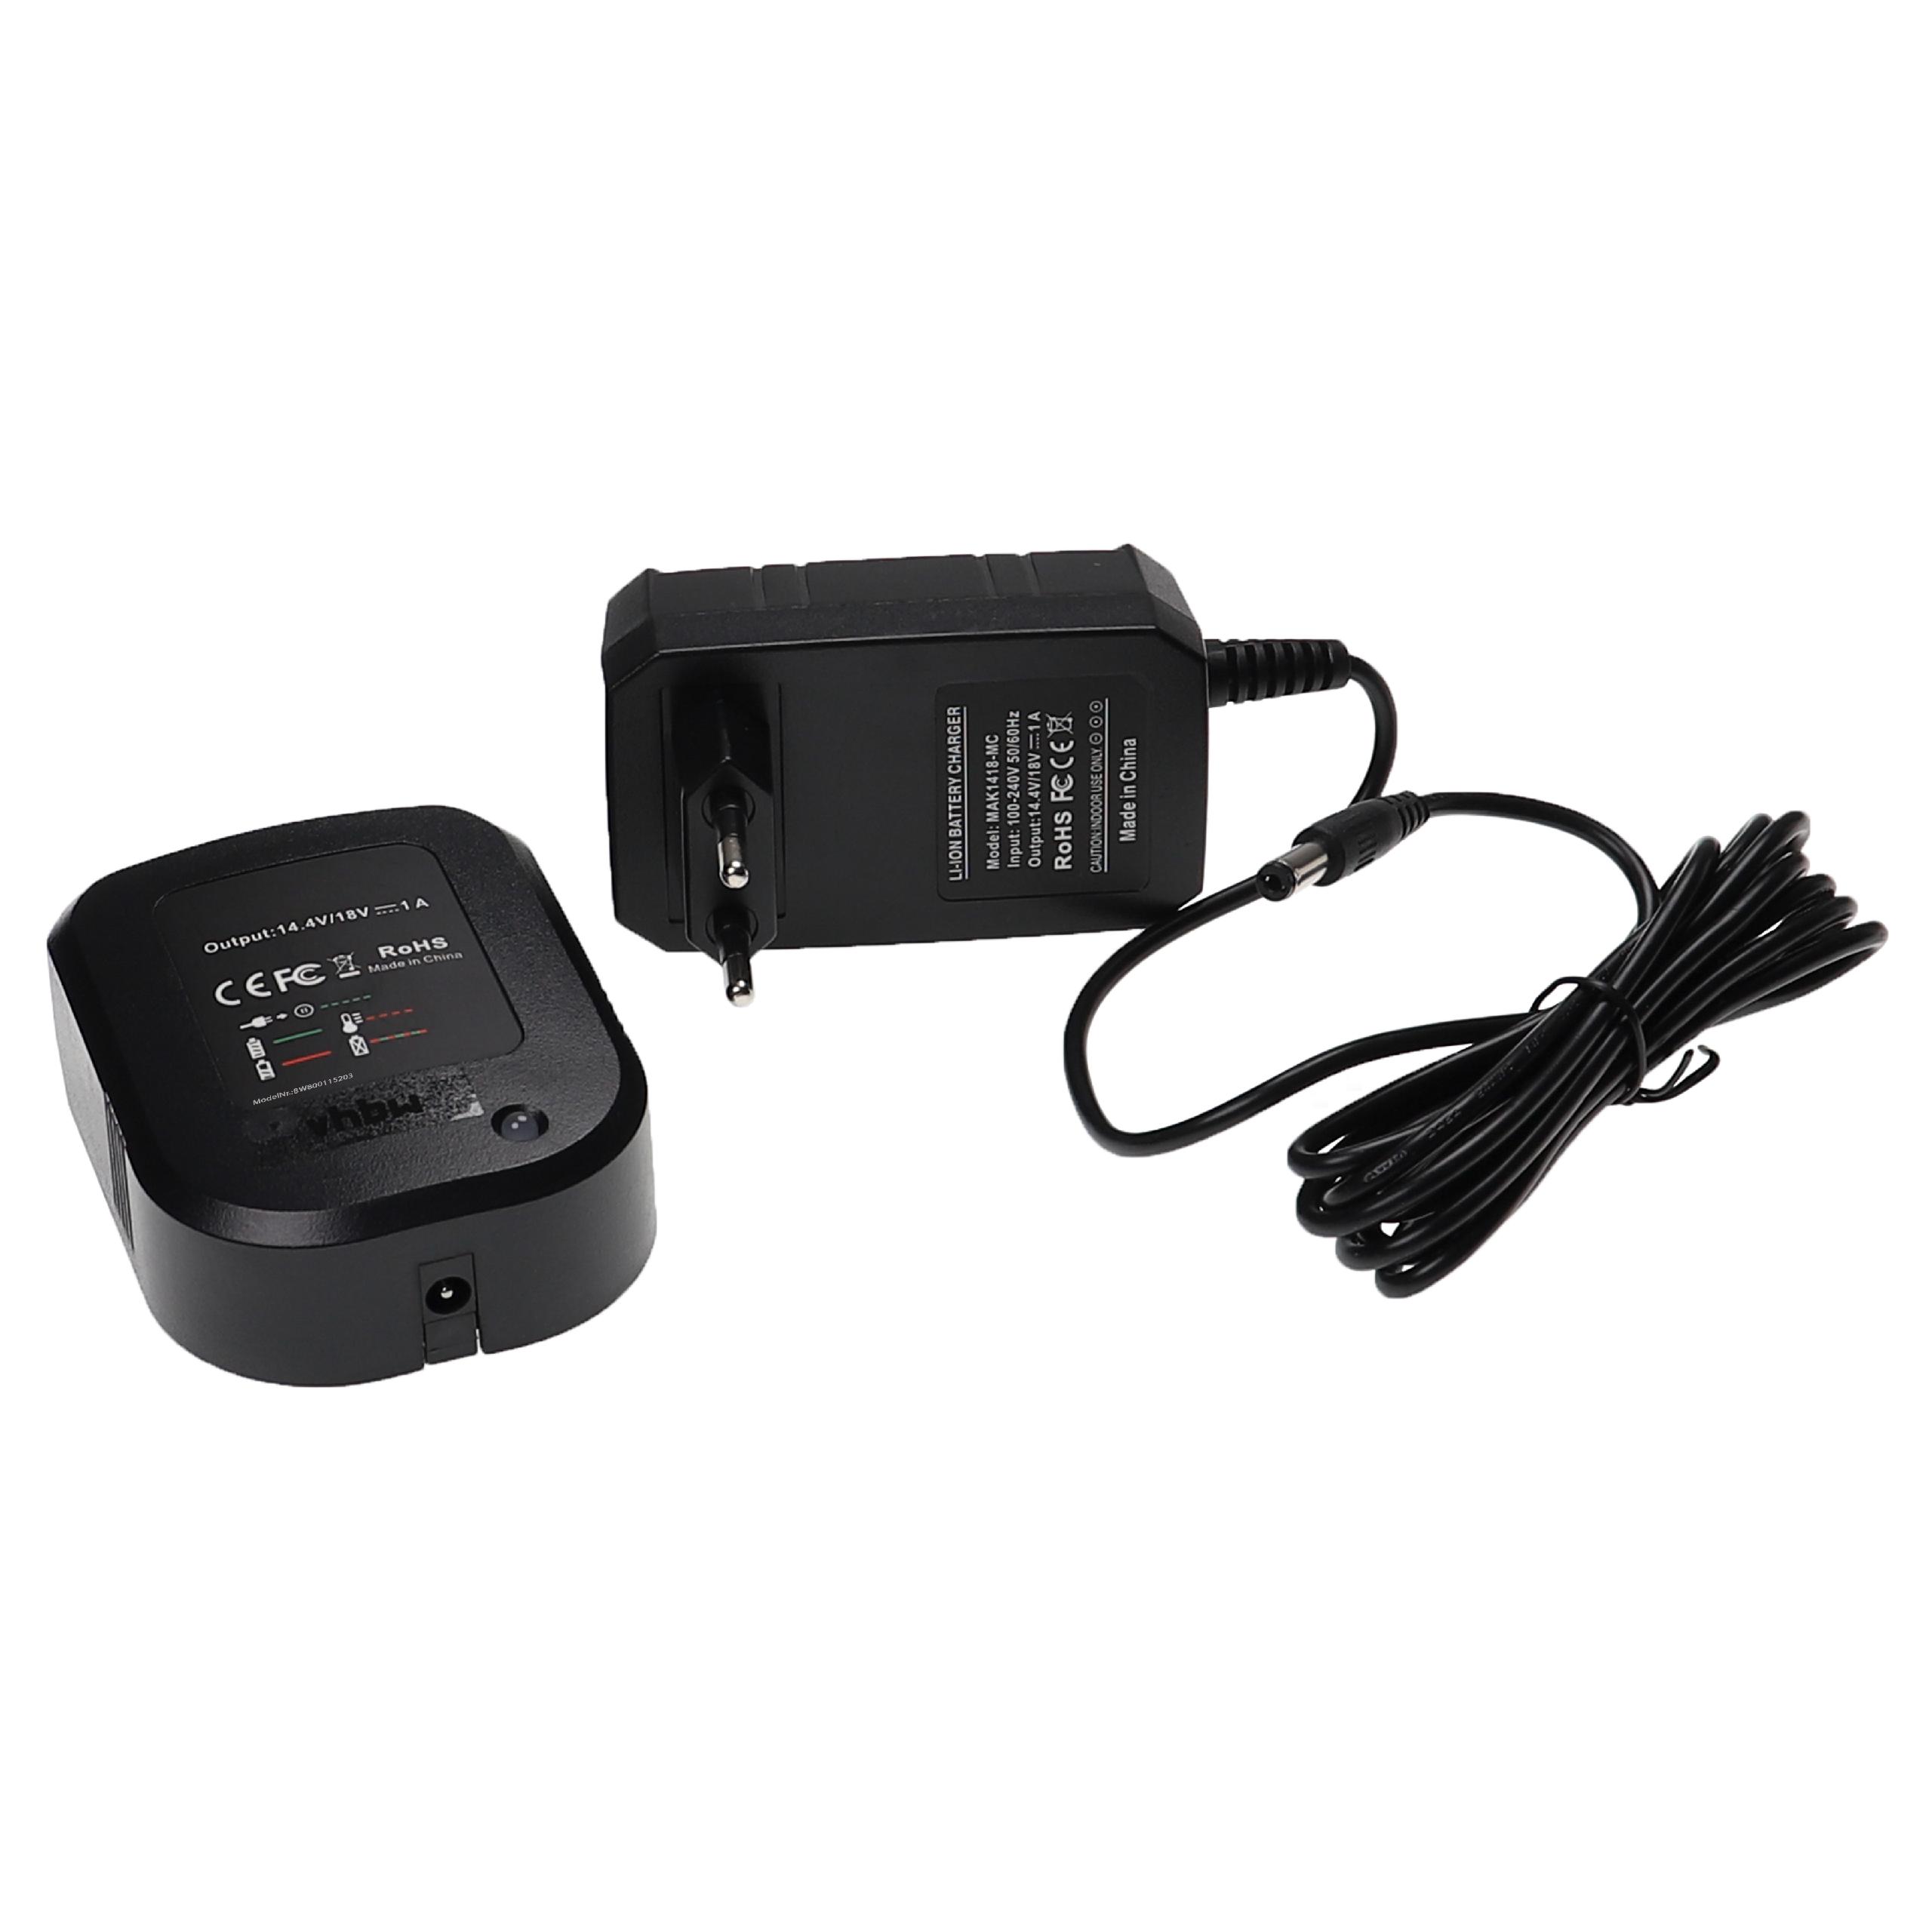 Charger suitable for LST-270 LinderPower Tool Batteries etc. Li-Ion 14.4 V